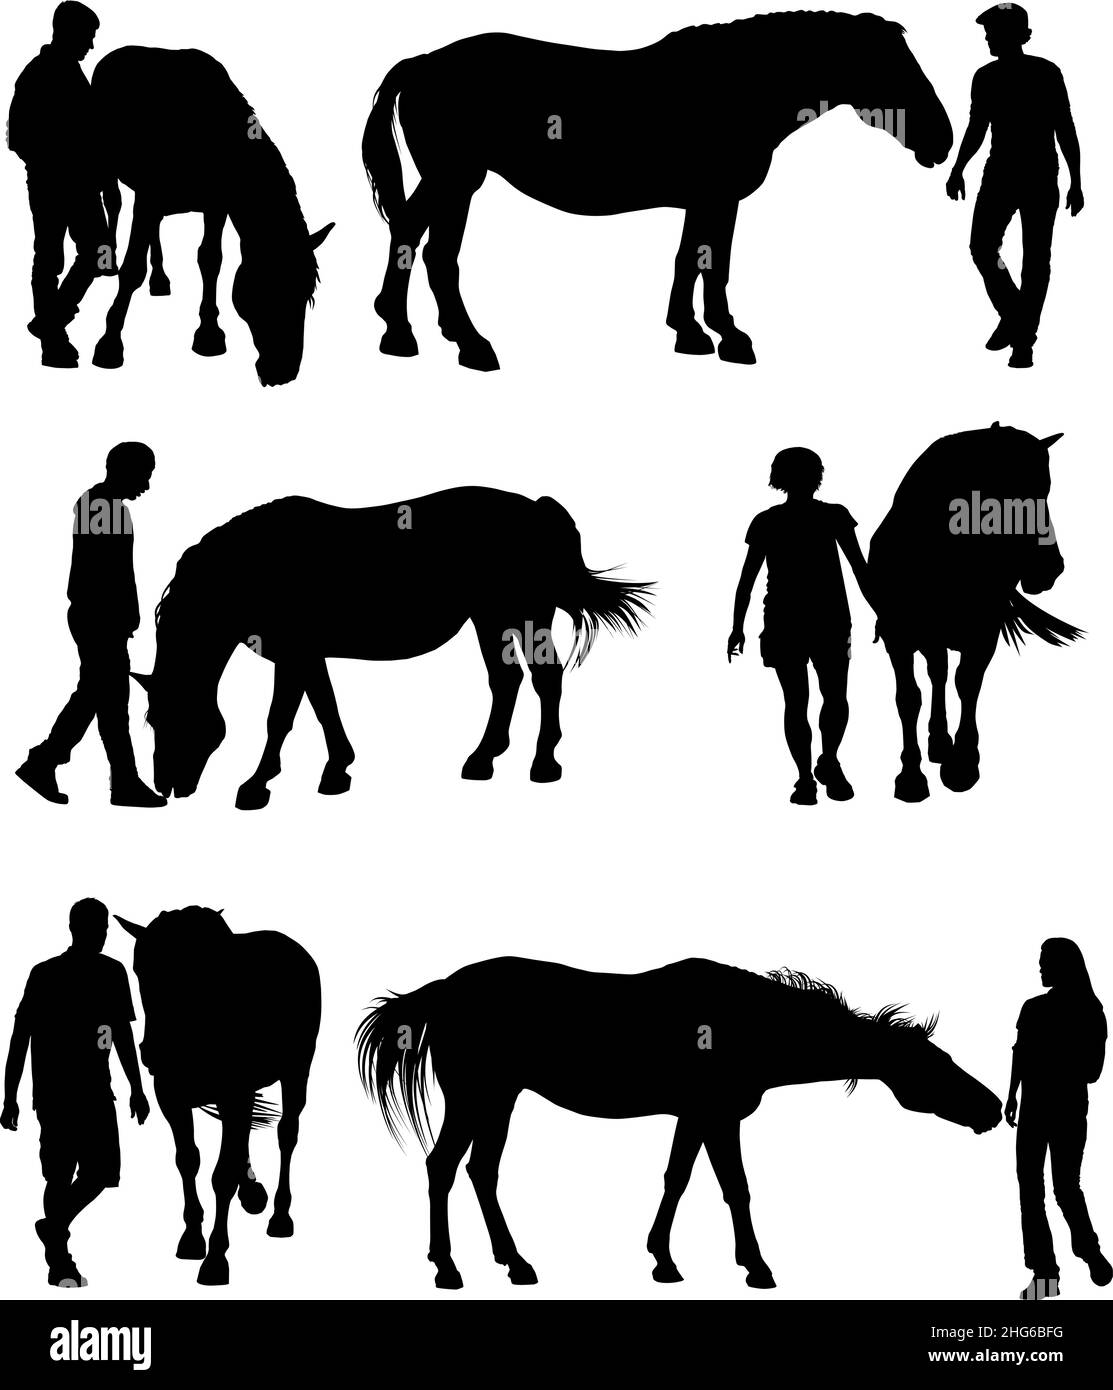 Horses and people Stock Vector